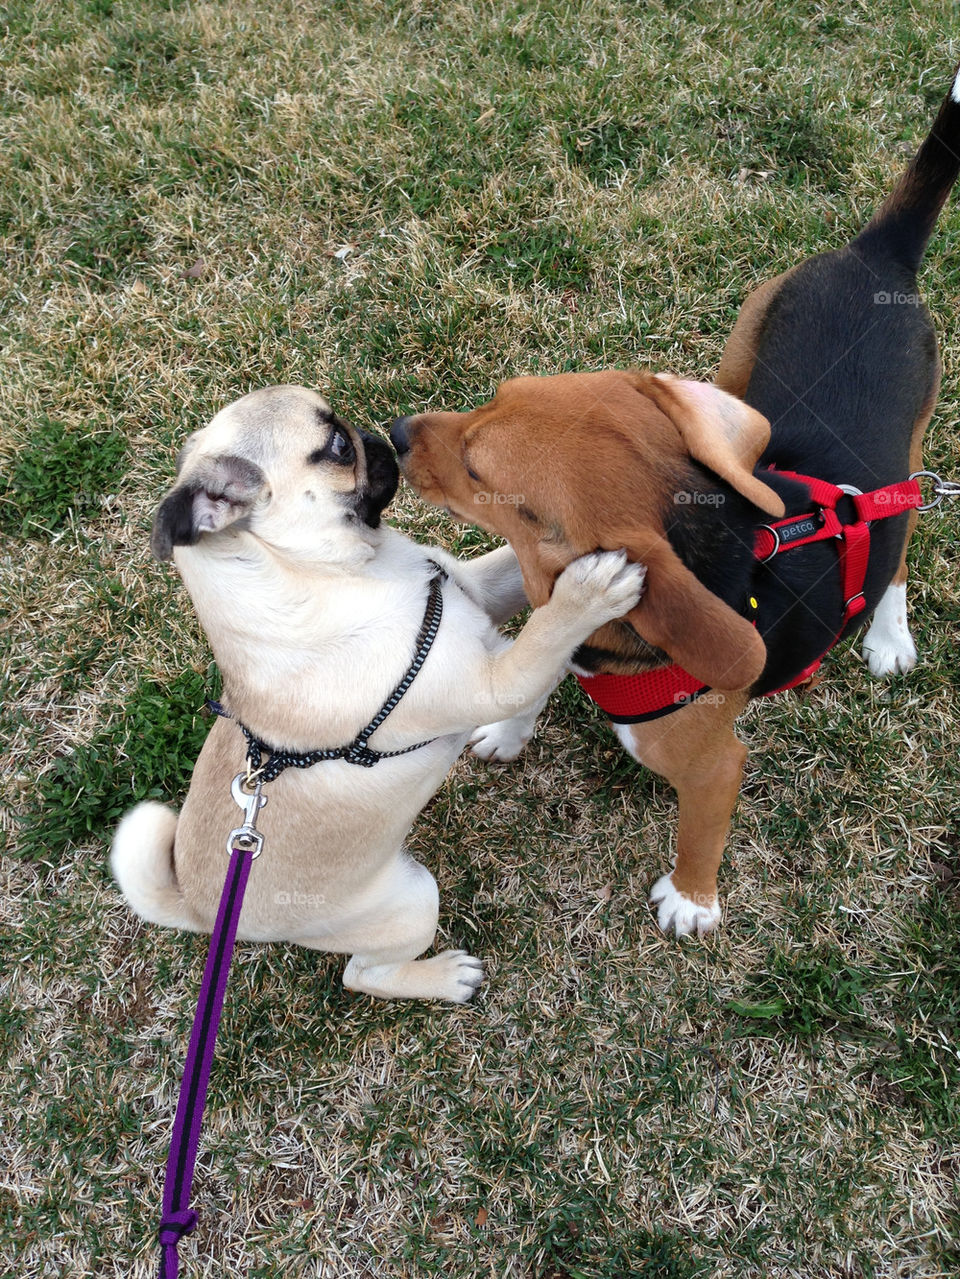 And now I'm going to kiss you!